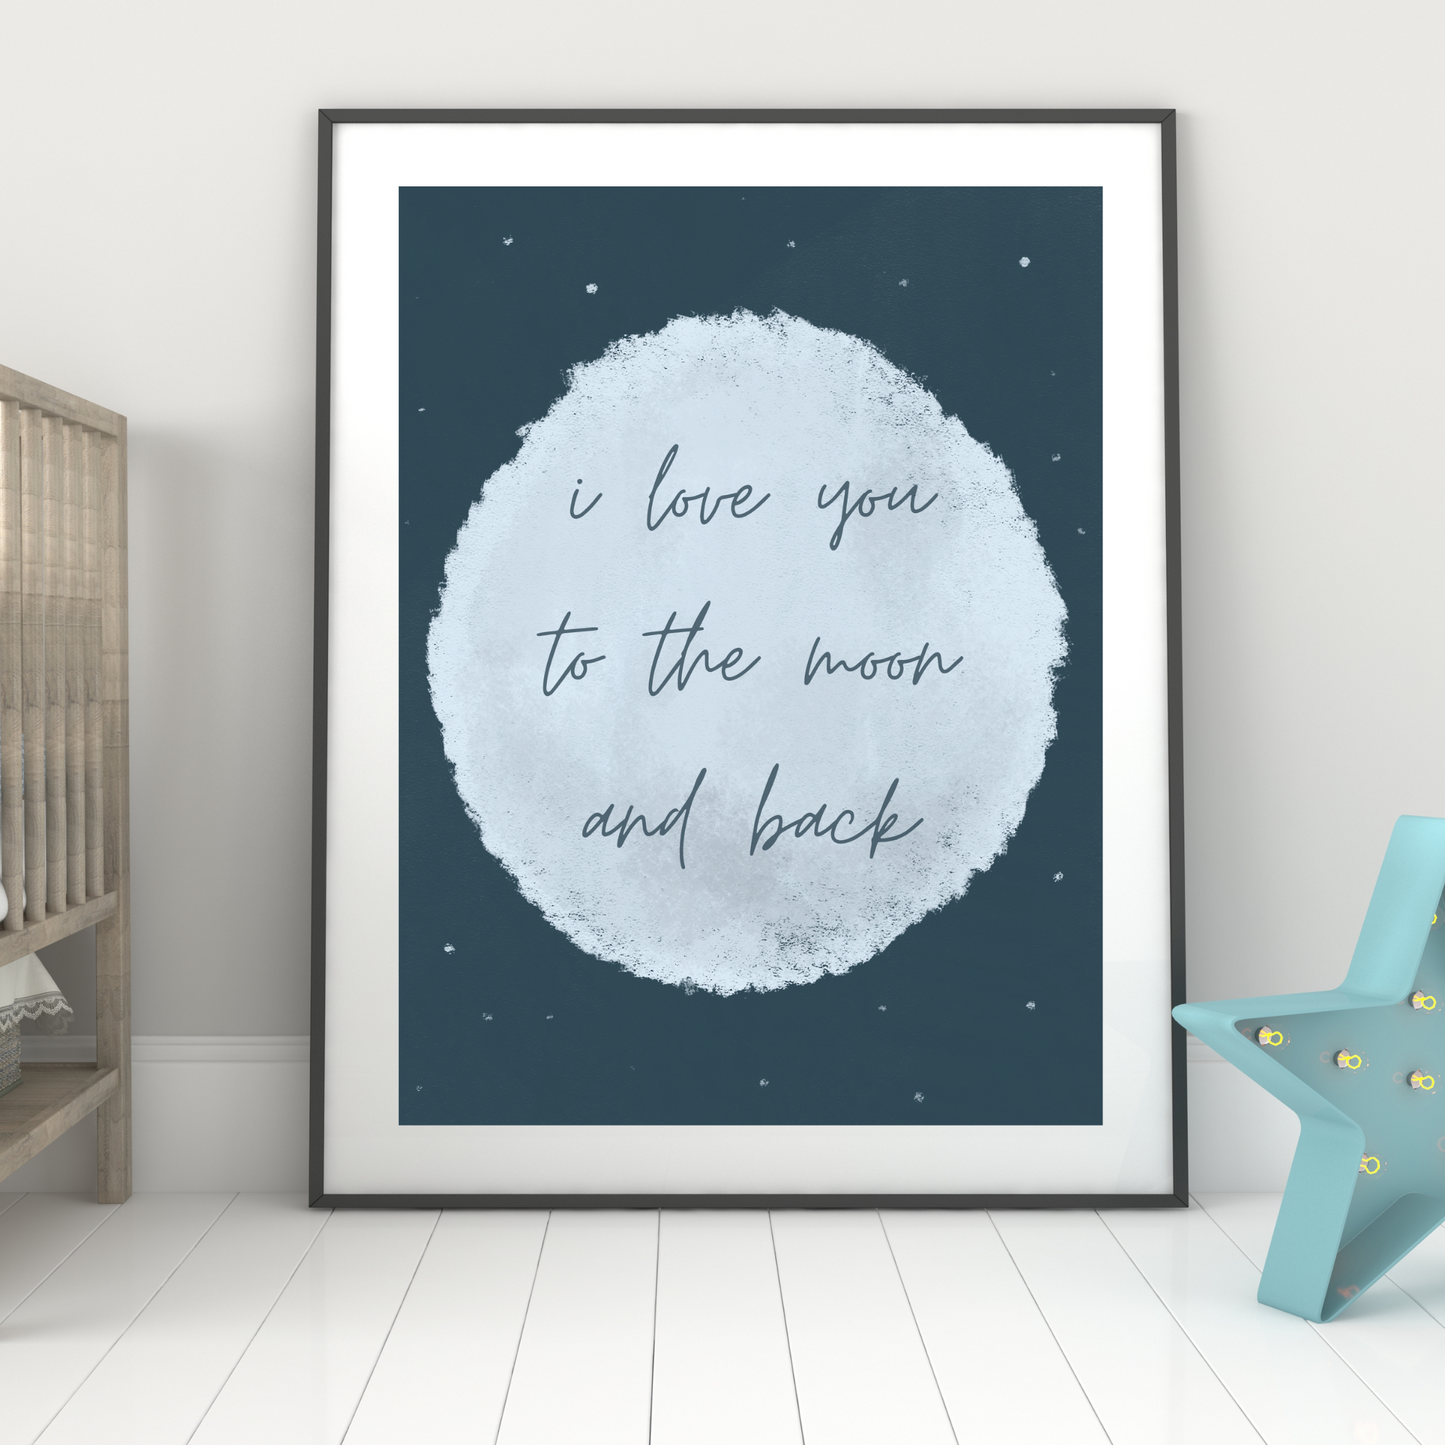 To The Moon and Back + More Than All The Stars Nursery Wall Art Bundle | Digital Download